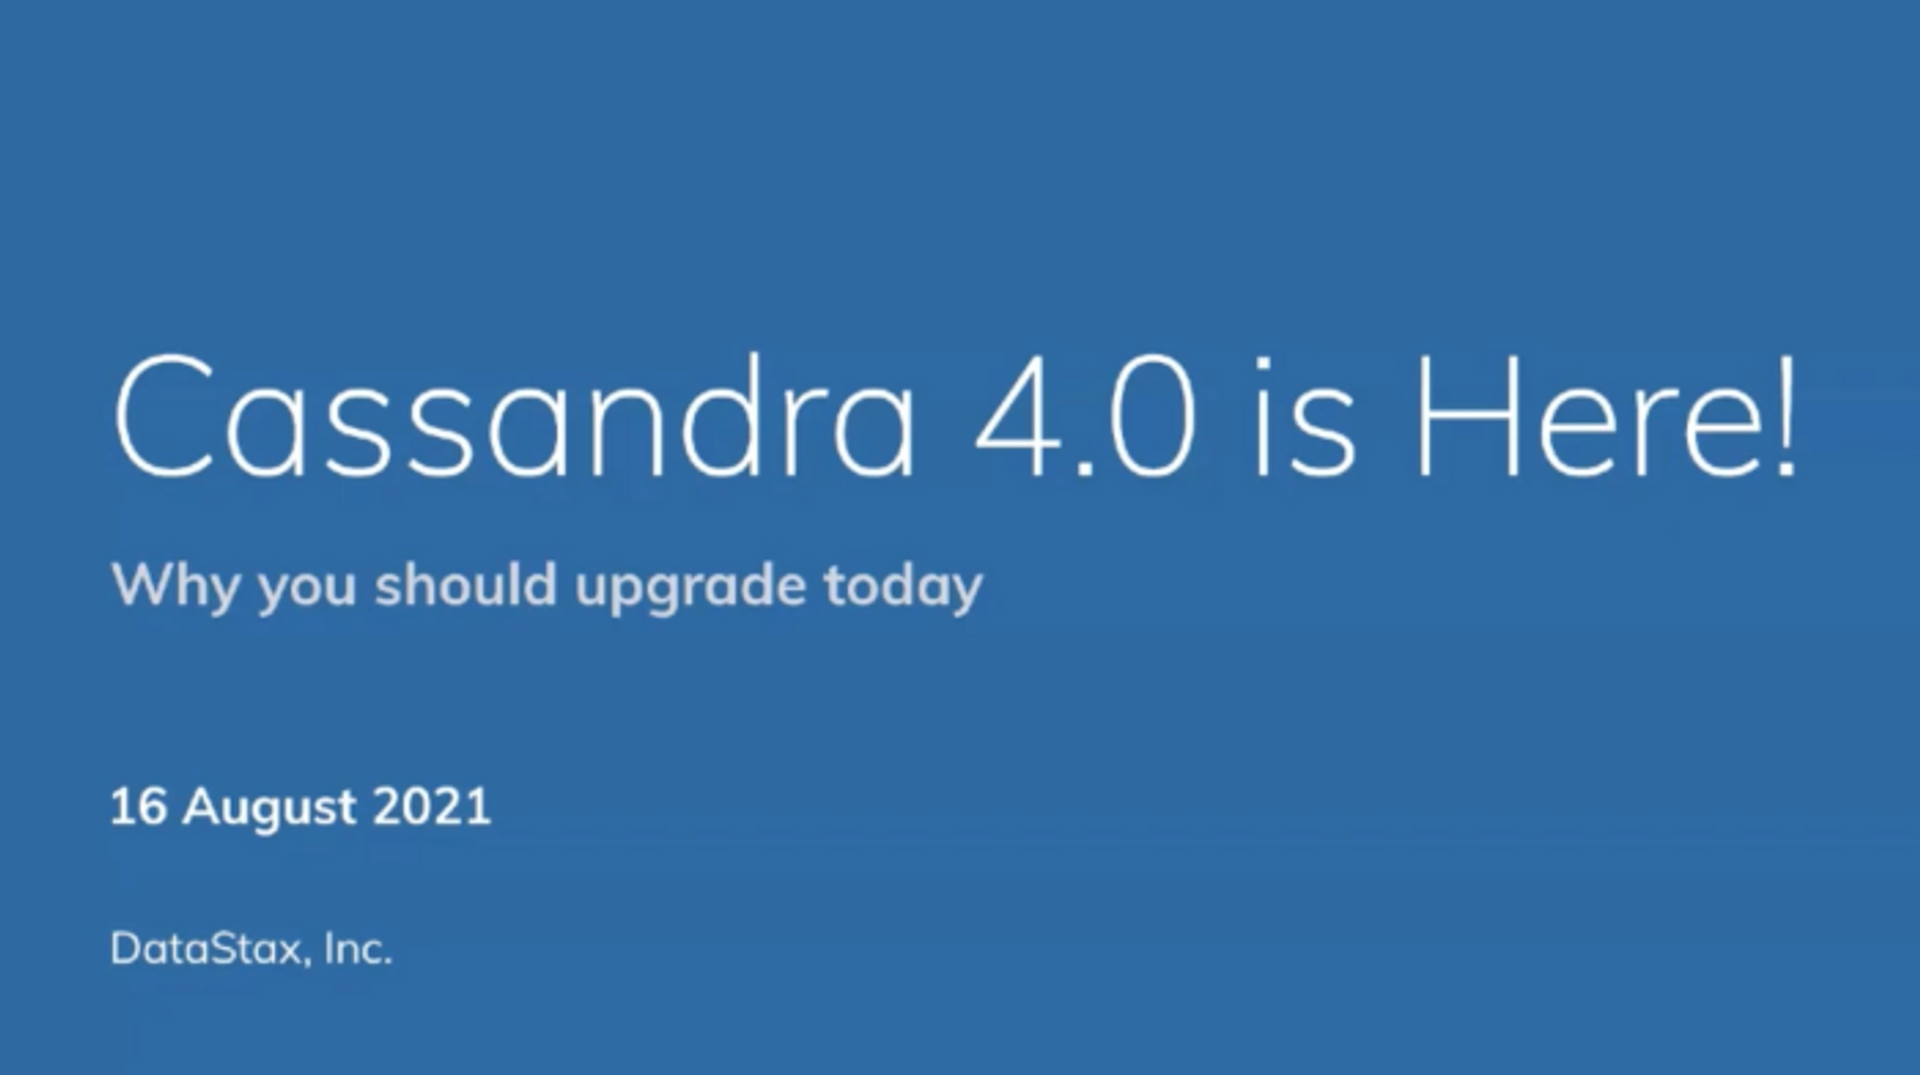 Cassandra 4.0 is Here! Why you should upgrade today